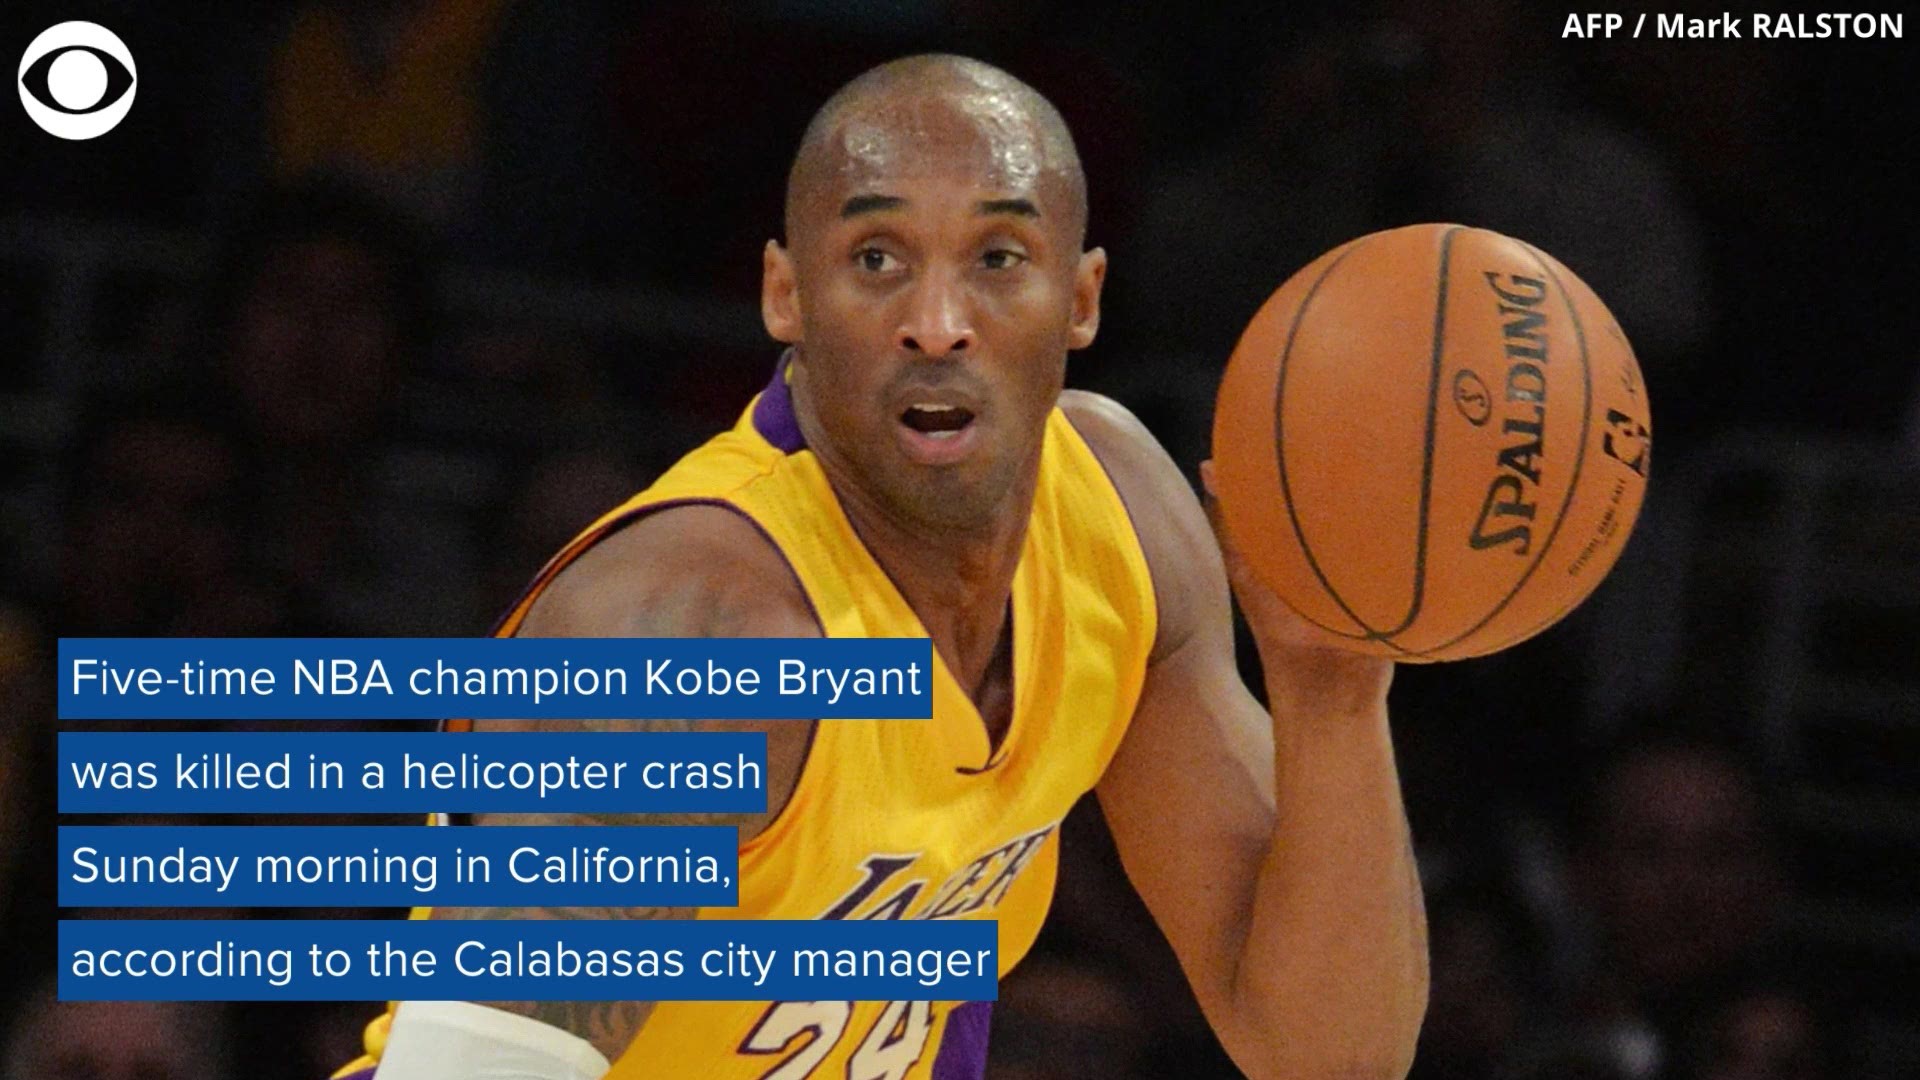 NBA legend Kobe Bryant was killed in a helicopter crash Sunday morning in California, according to officials in Calabasas.